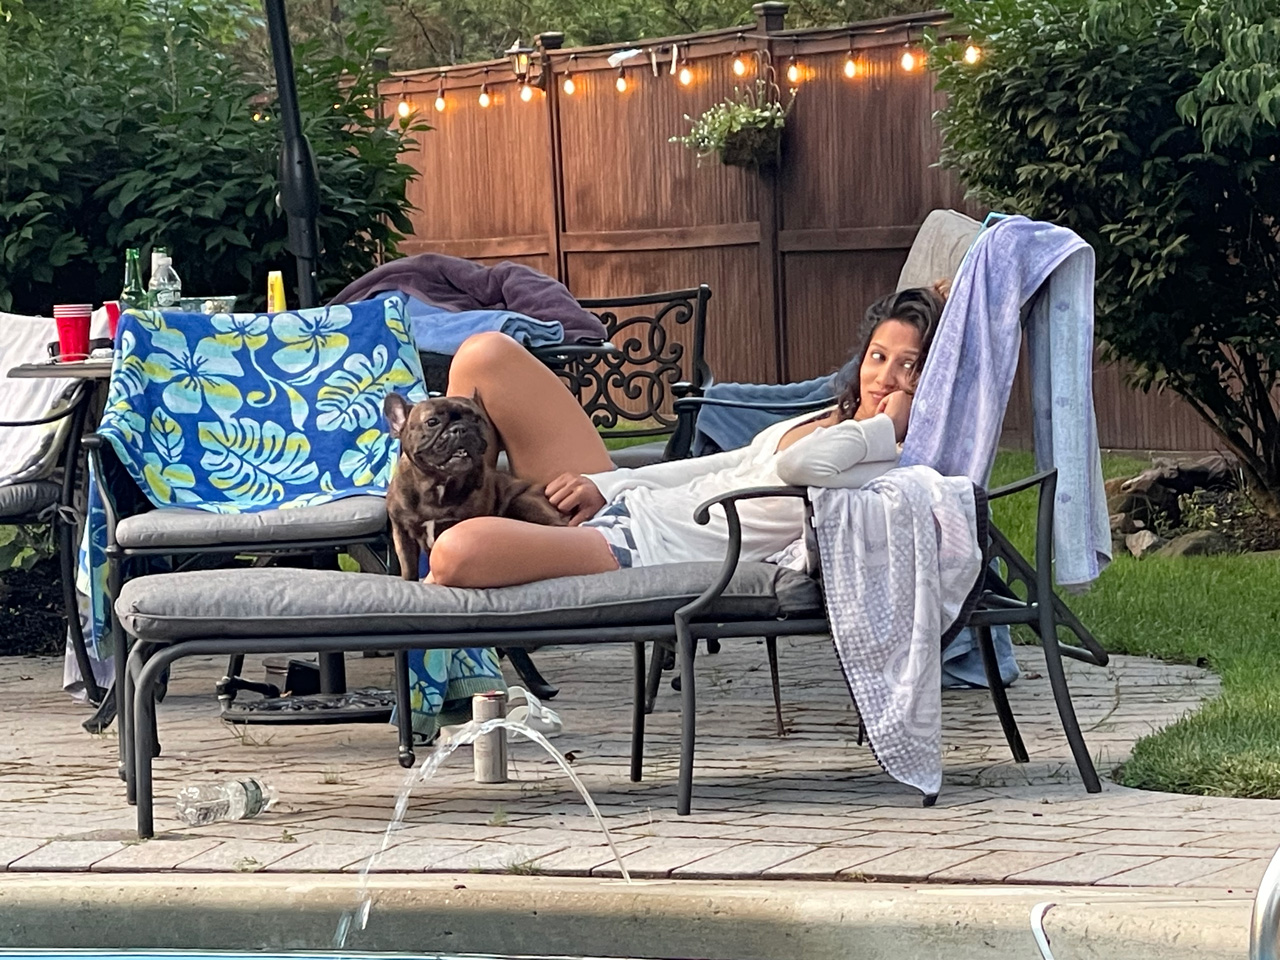 a picture of cris laying by the pool with a dog